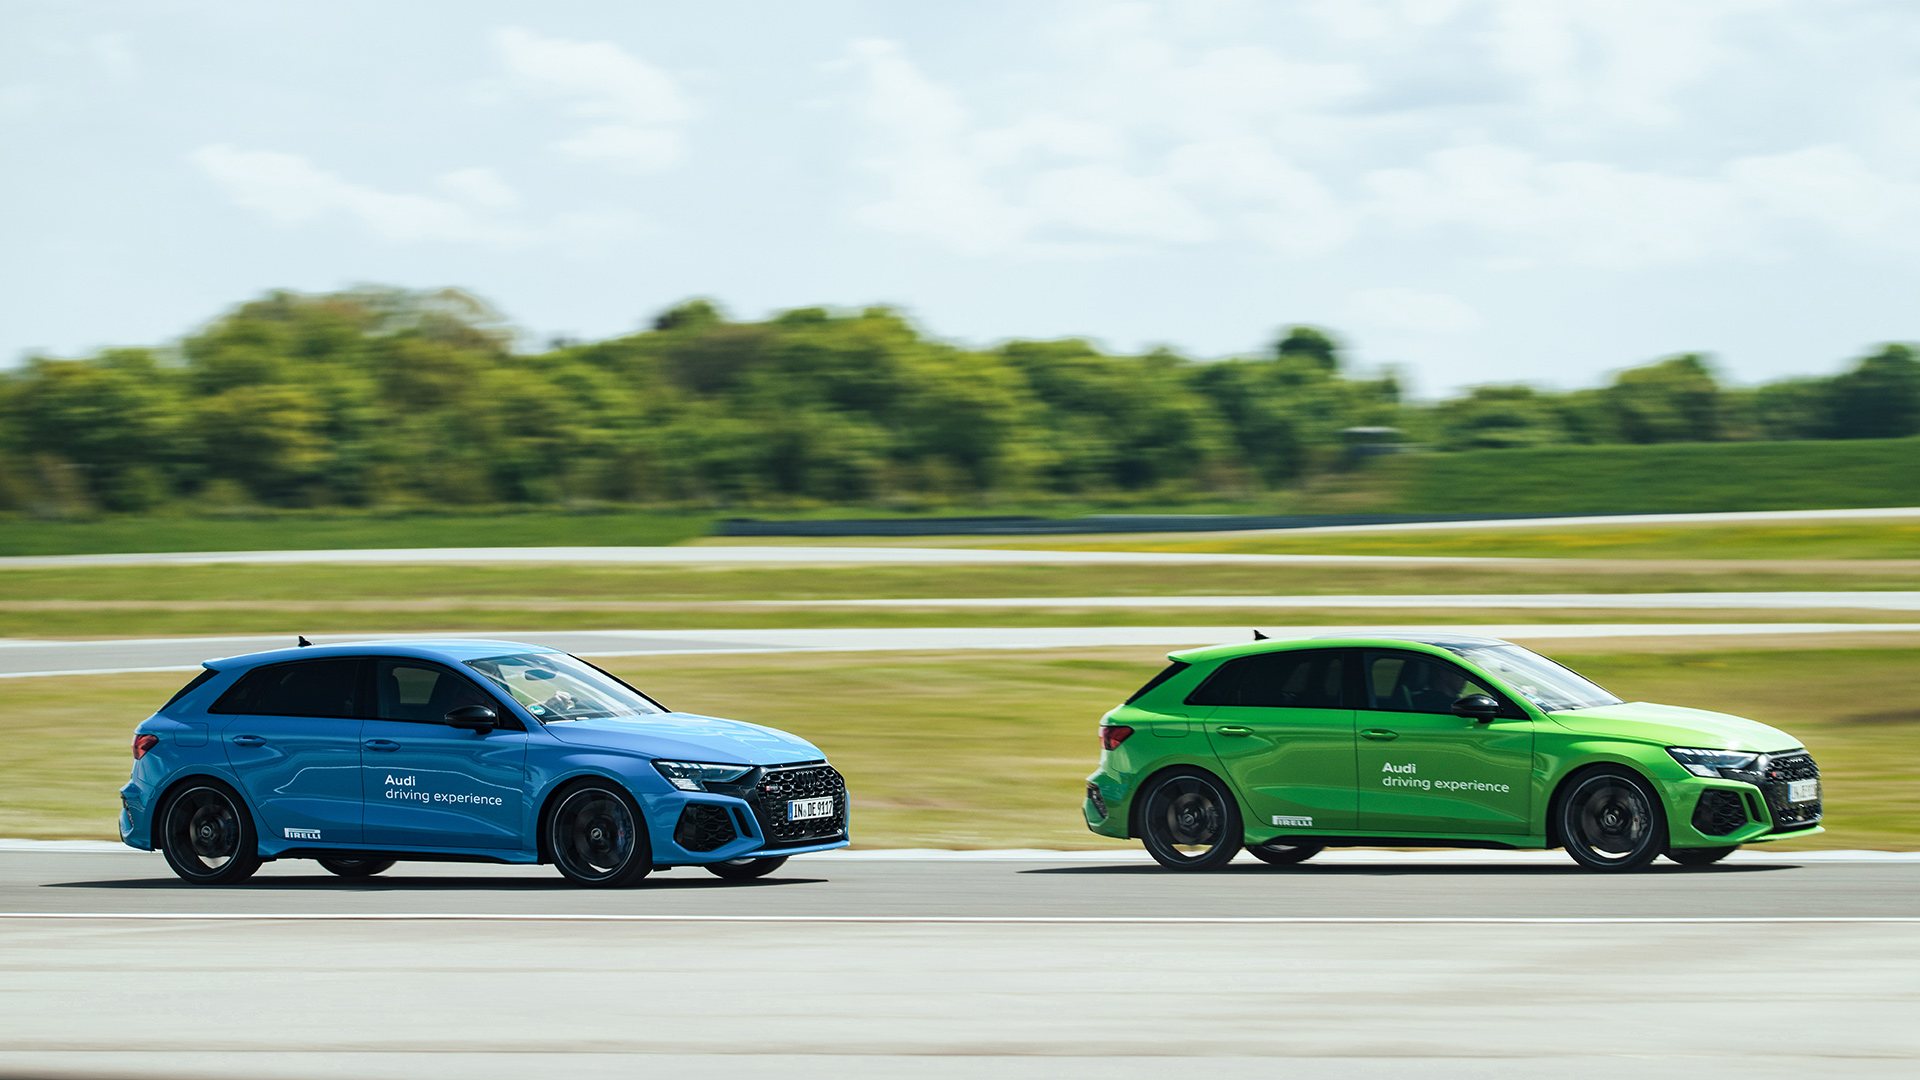 Blue and green Audi RS 3 Sportback drive one behind the other on the race track